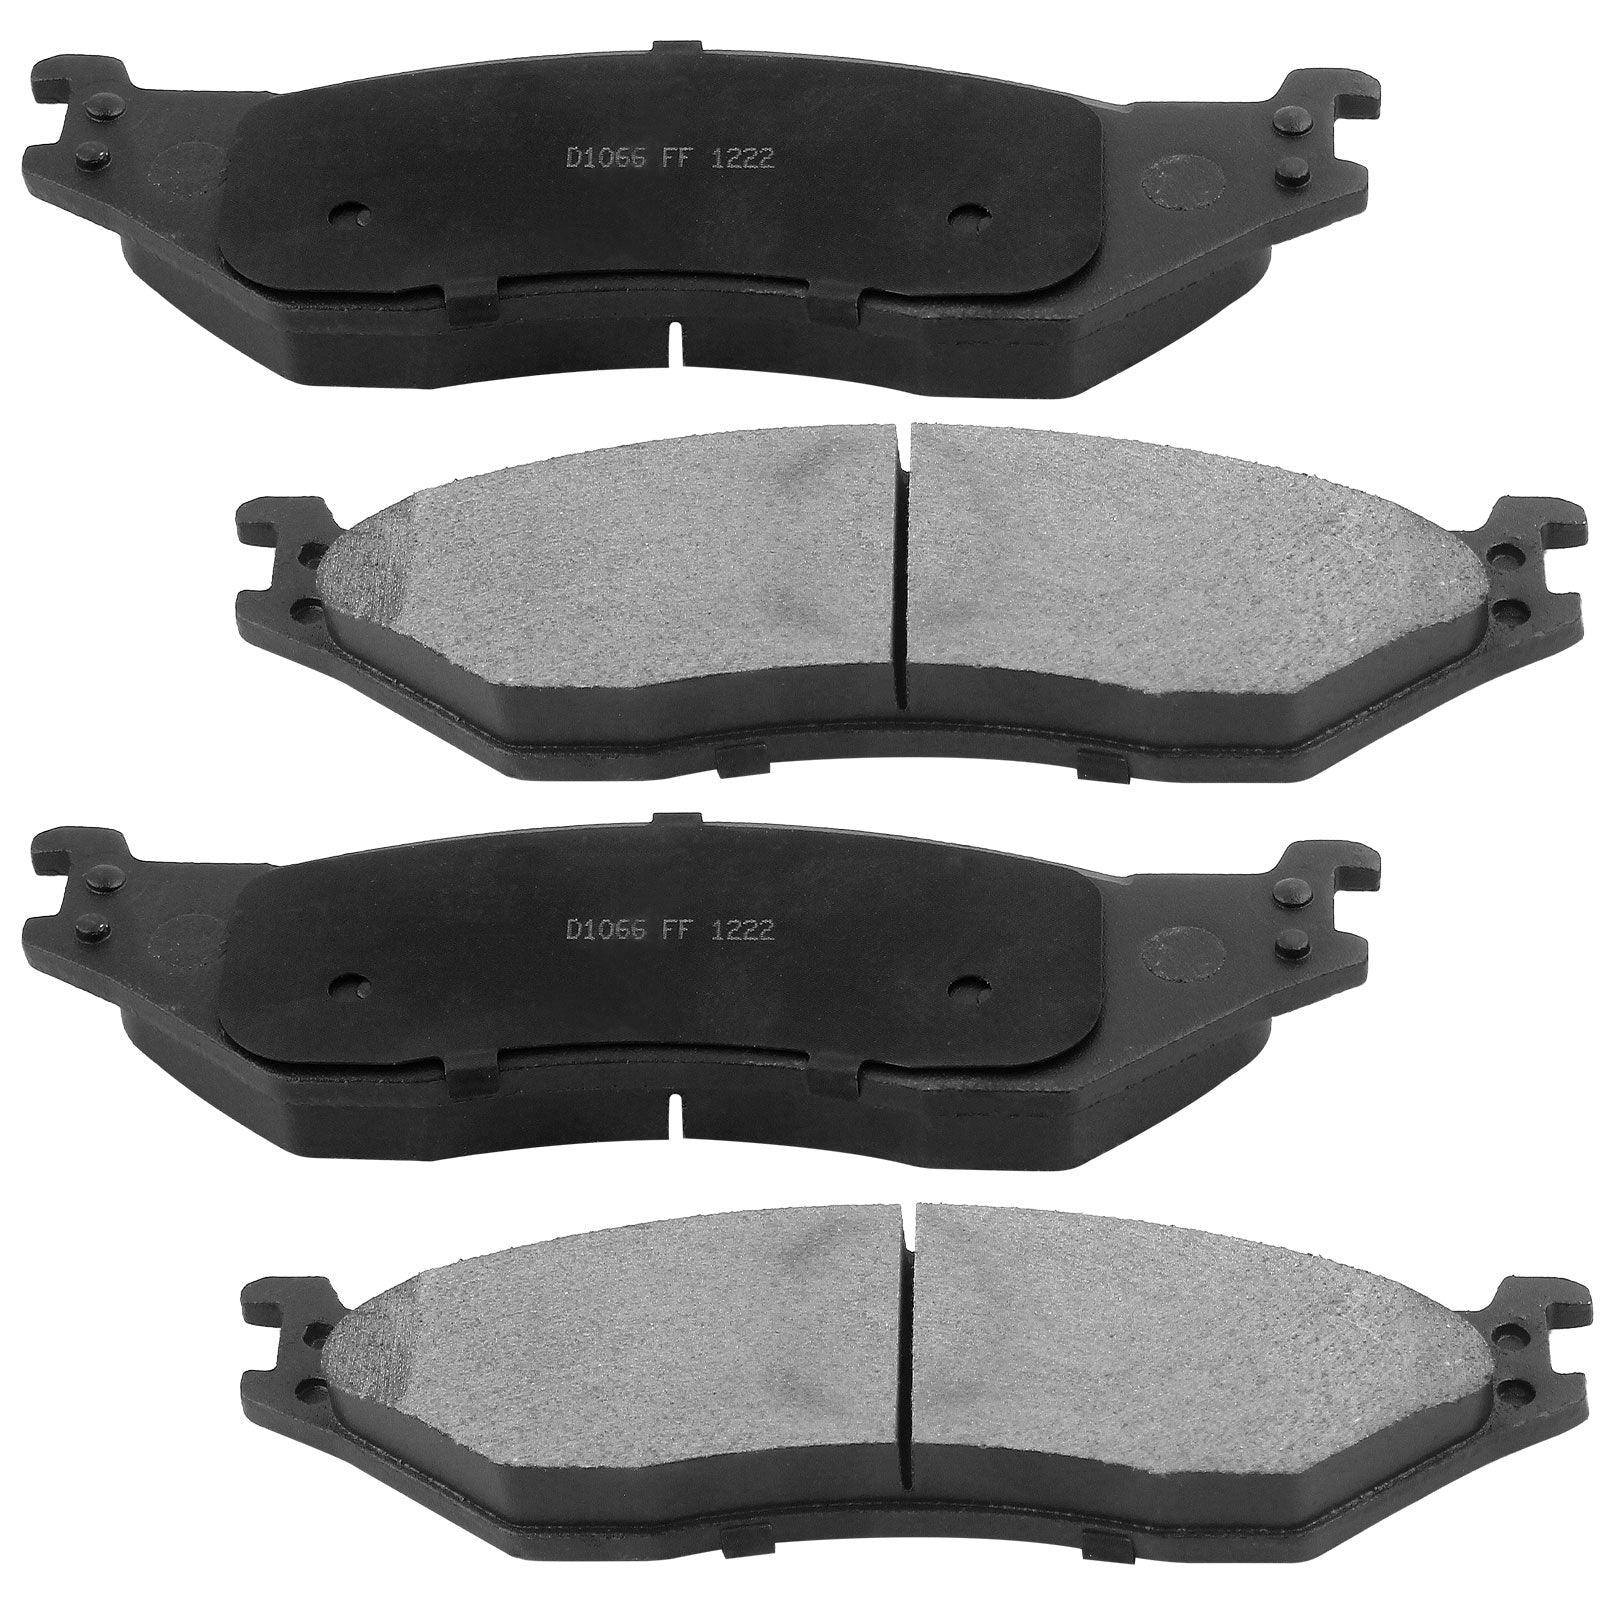 Front & Rear Ceramic Brake Pads w/Hardware Kits Fits for Ford F-450 F-550 Super Duty (All Models)-Ceramic Low Dust Brake Pad-4 Pack MotorbyMotor